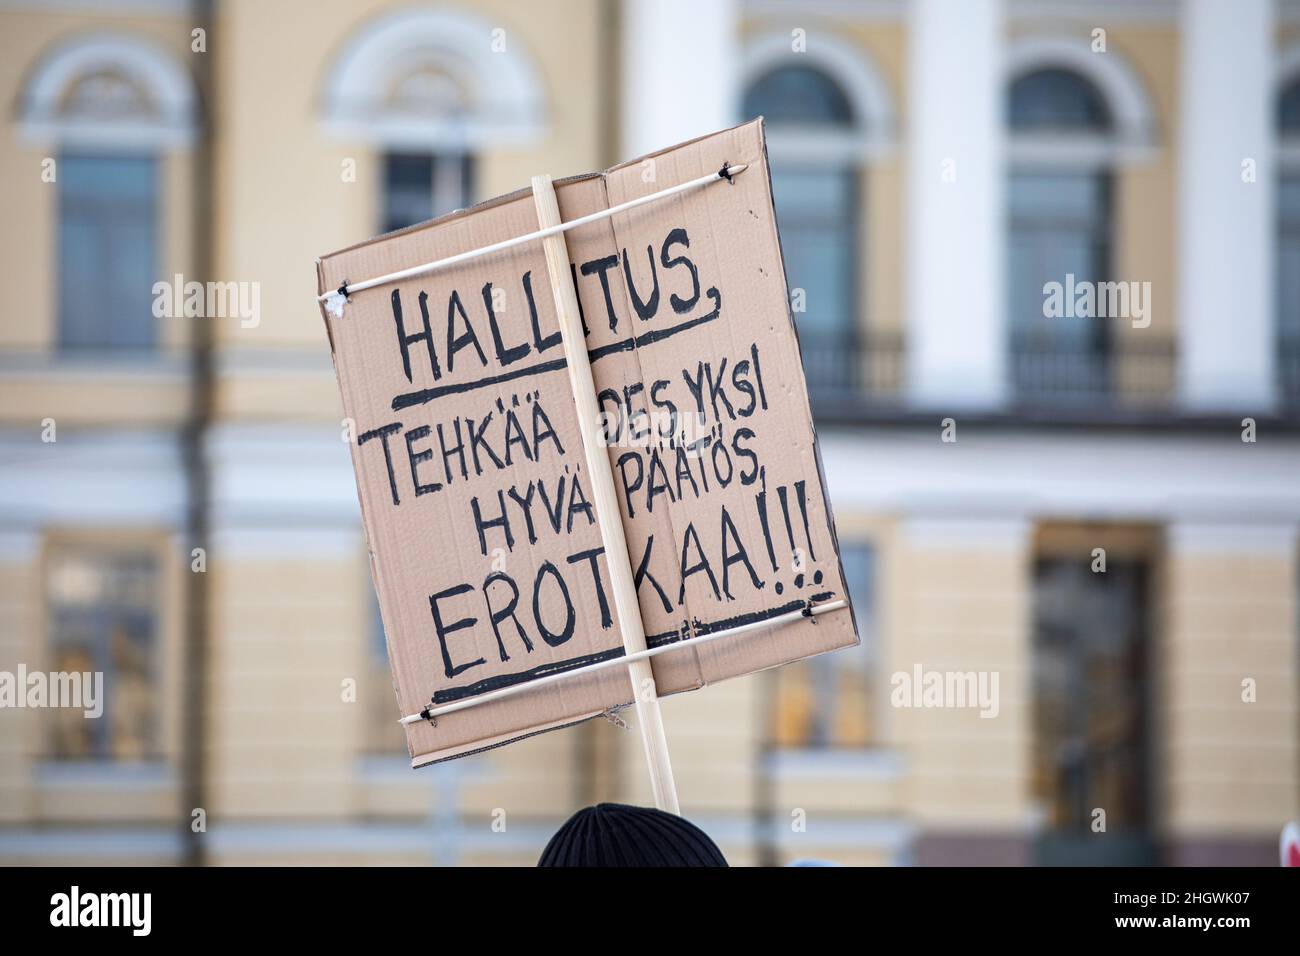 Protester's cardboard sign at demonstration against Covid-19 restrictions on Senate Square in Helsinki, Finland Stock Photo